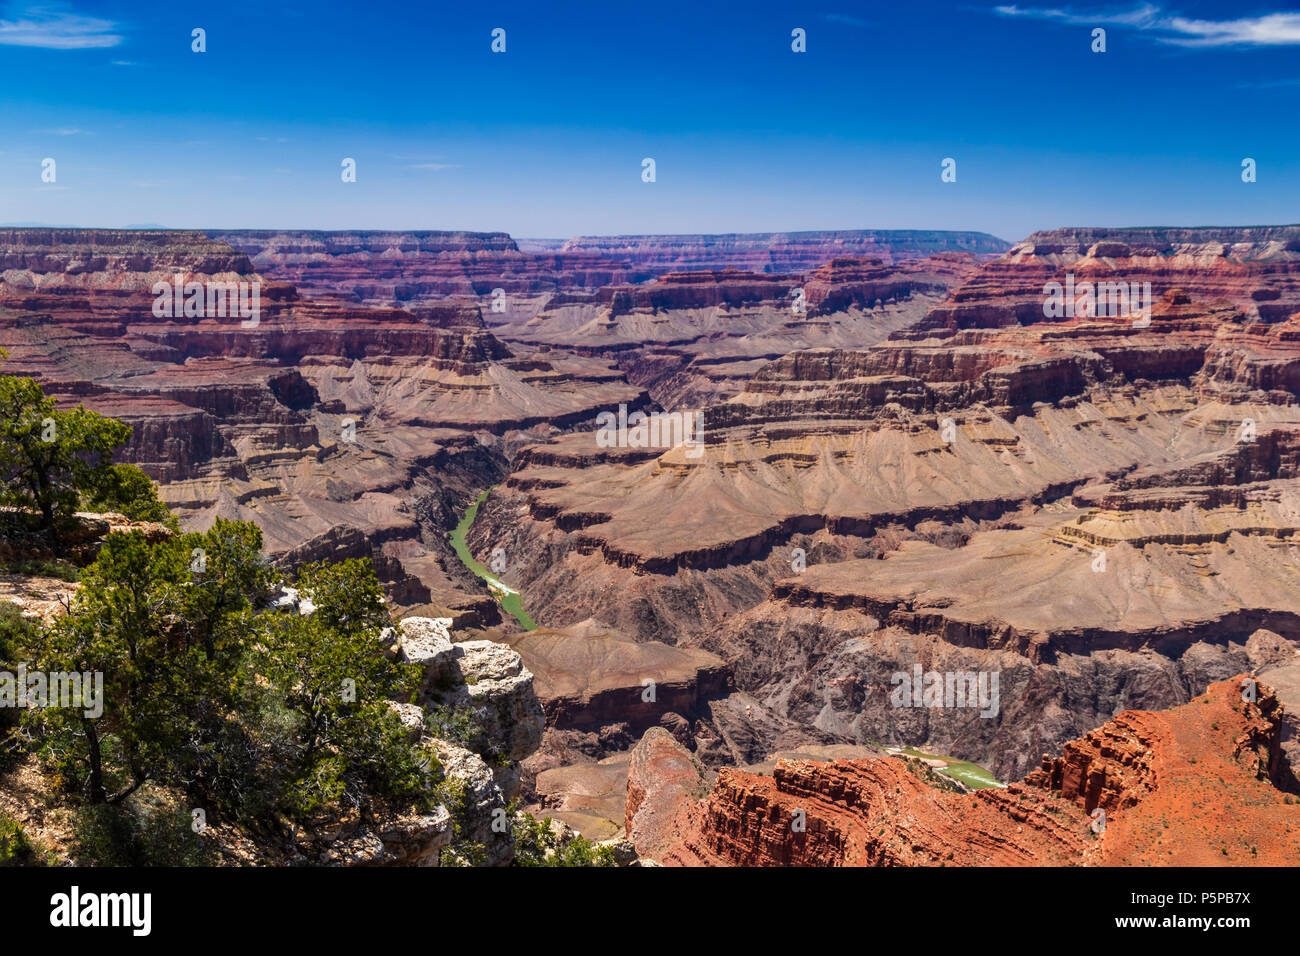 Panoramic view of the Grand Canyon, looking westward from the South Rim; the Colorado River can be seen below. Stock Photo